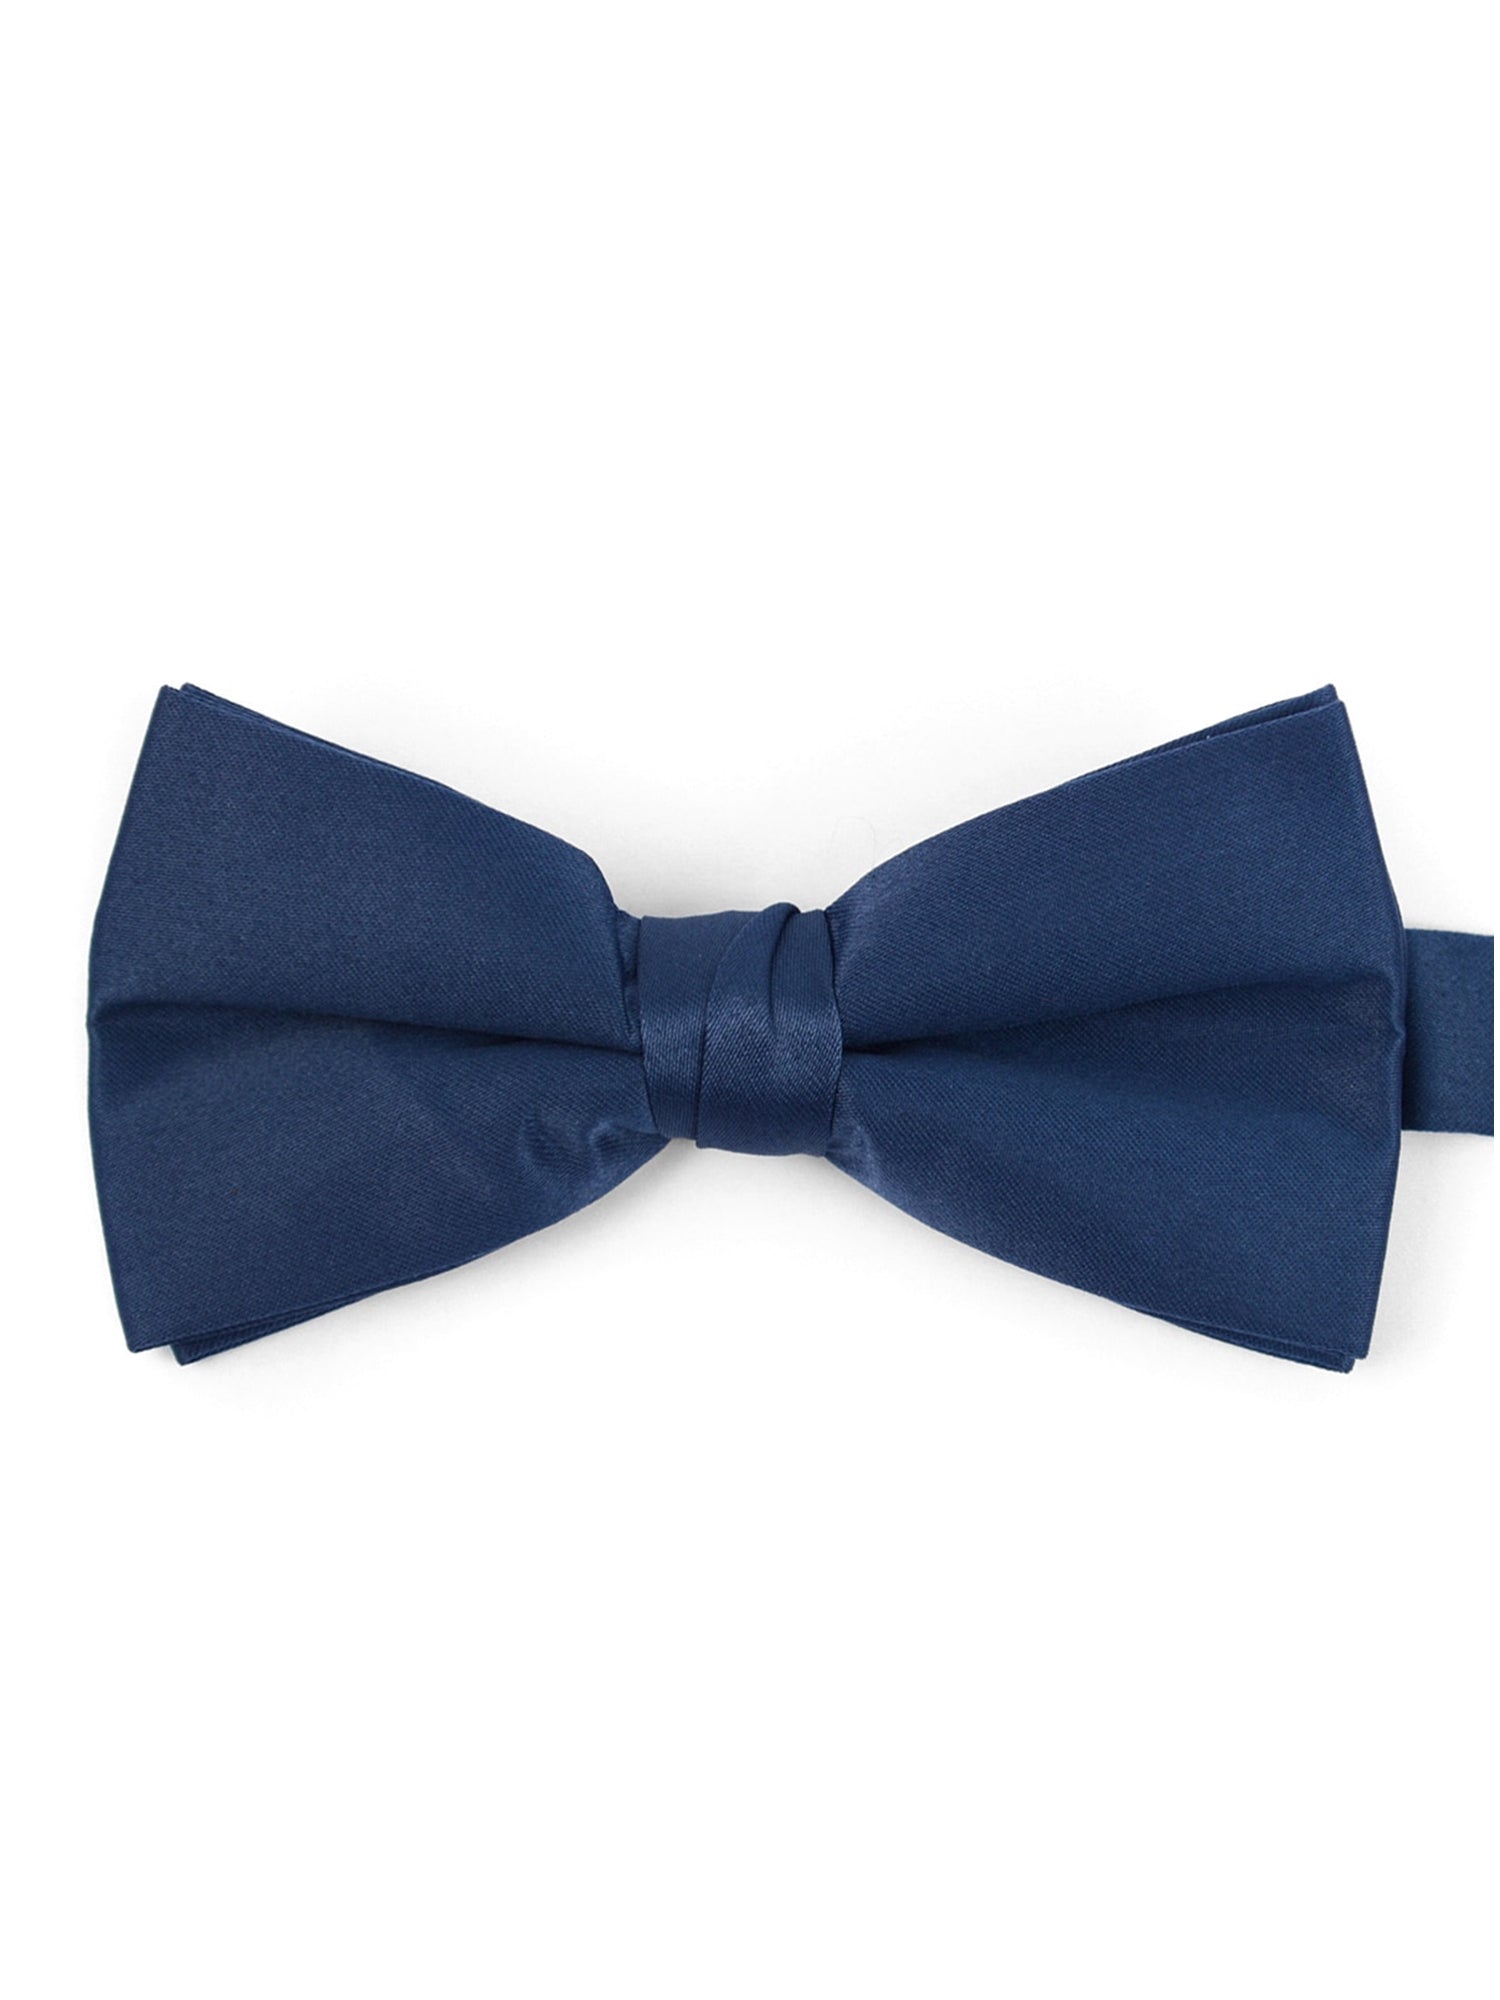 Men's Pre-tied Adjustable Length Bow Tie - Formal Tuxedo Solid Color Men's Solid Color Bow Tie TheDapperTie French Blue One Size 